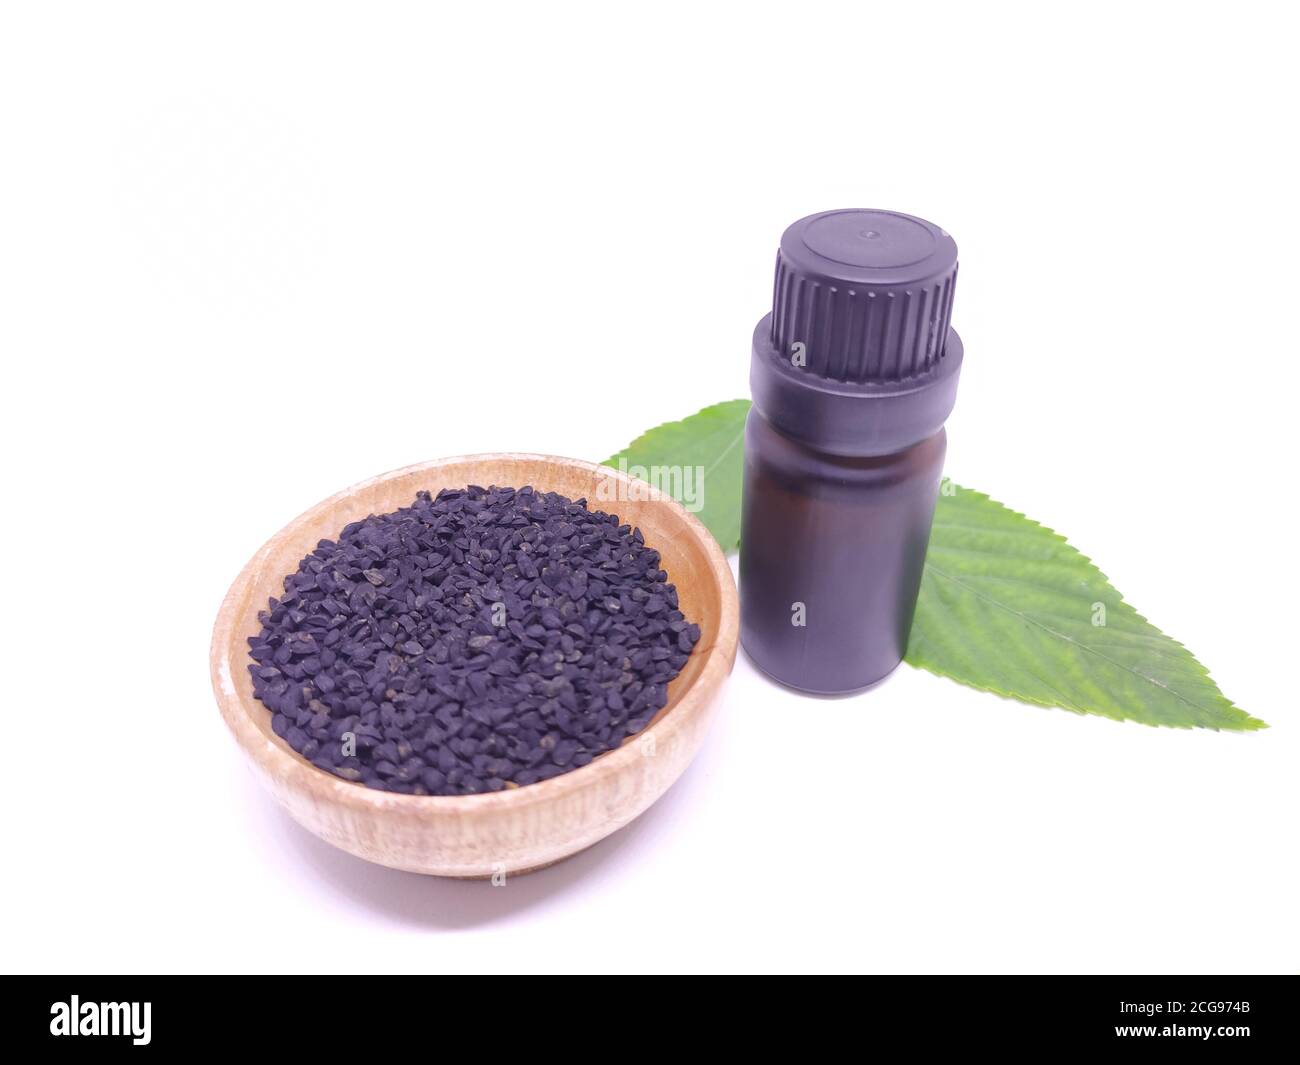 Black cumin seeds in a wooden bowl and oil in a bottle with green leaves. Stock Photo